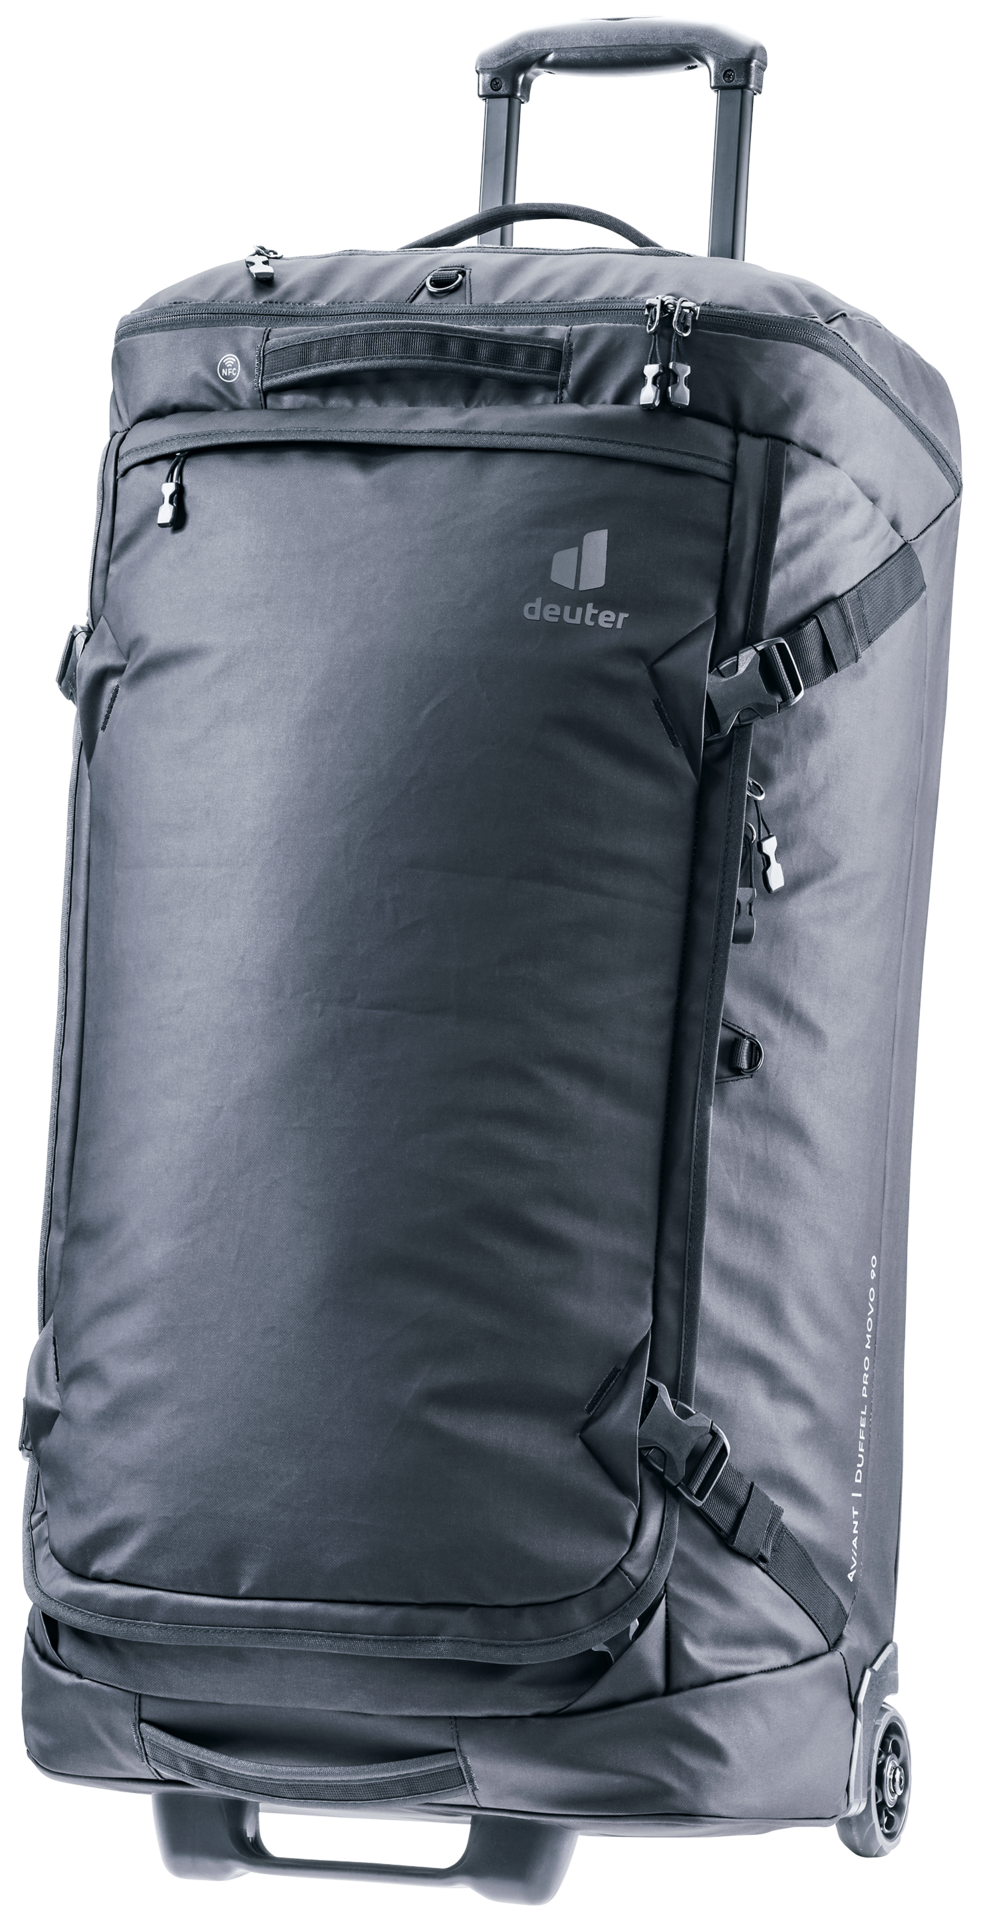 Unlock Wilderness' choice in the Deuter Vs North Face comparison, the AViANT Duffel Pro Movo 90 by Deuter